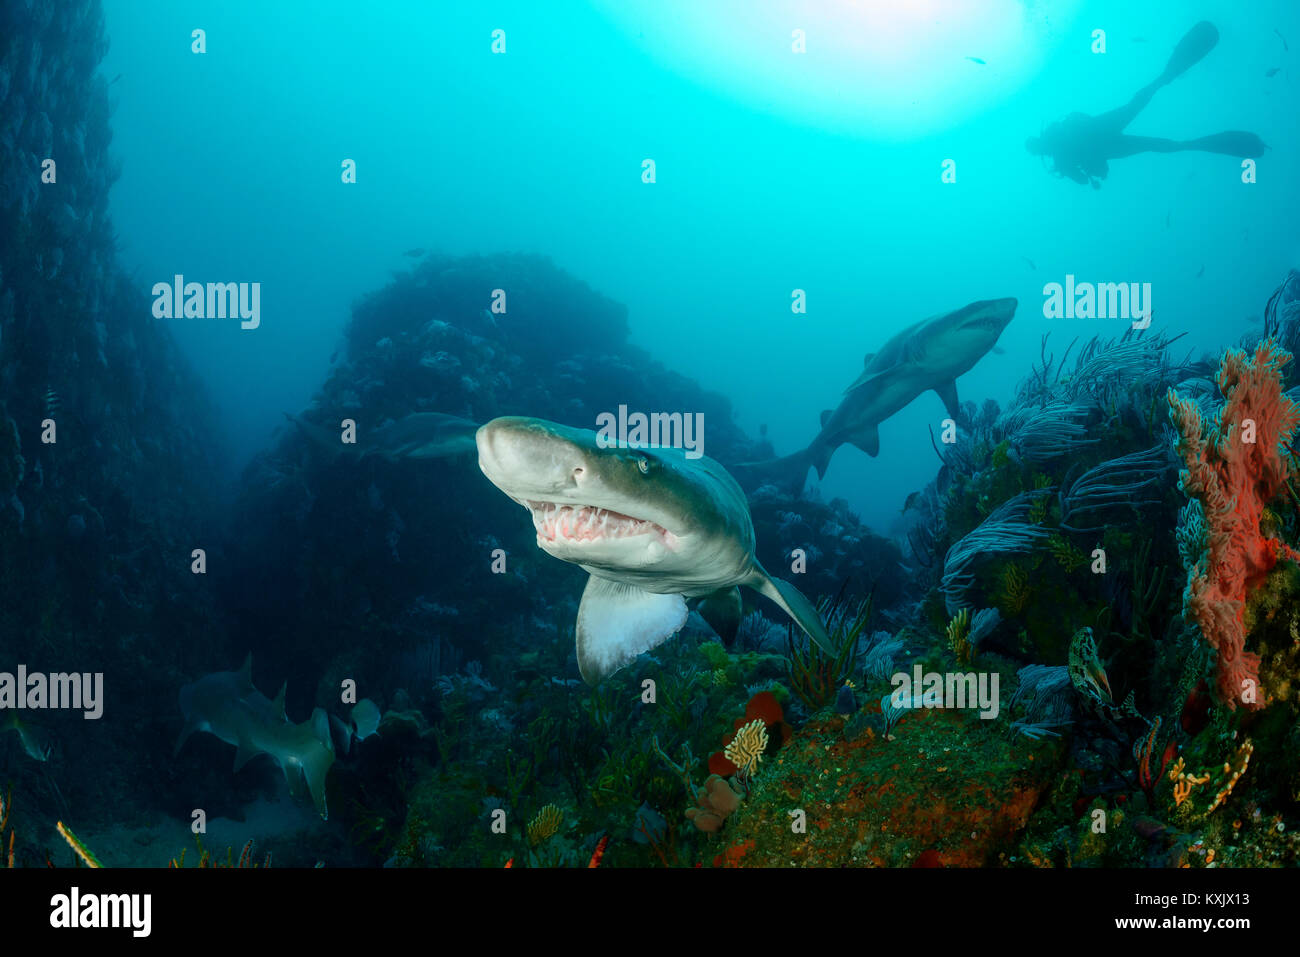 Sand tiger shark, Raggedthoothed Shark and scuba diver, Carcharias taurus, Porth Elizabeth, Algoa Bay, Nelson Mandela Bay, South Africa, Indian Ocean Stock Photo